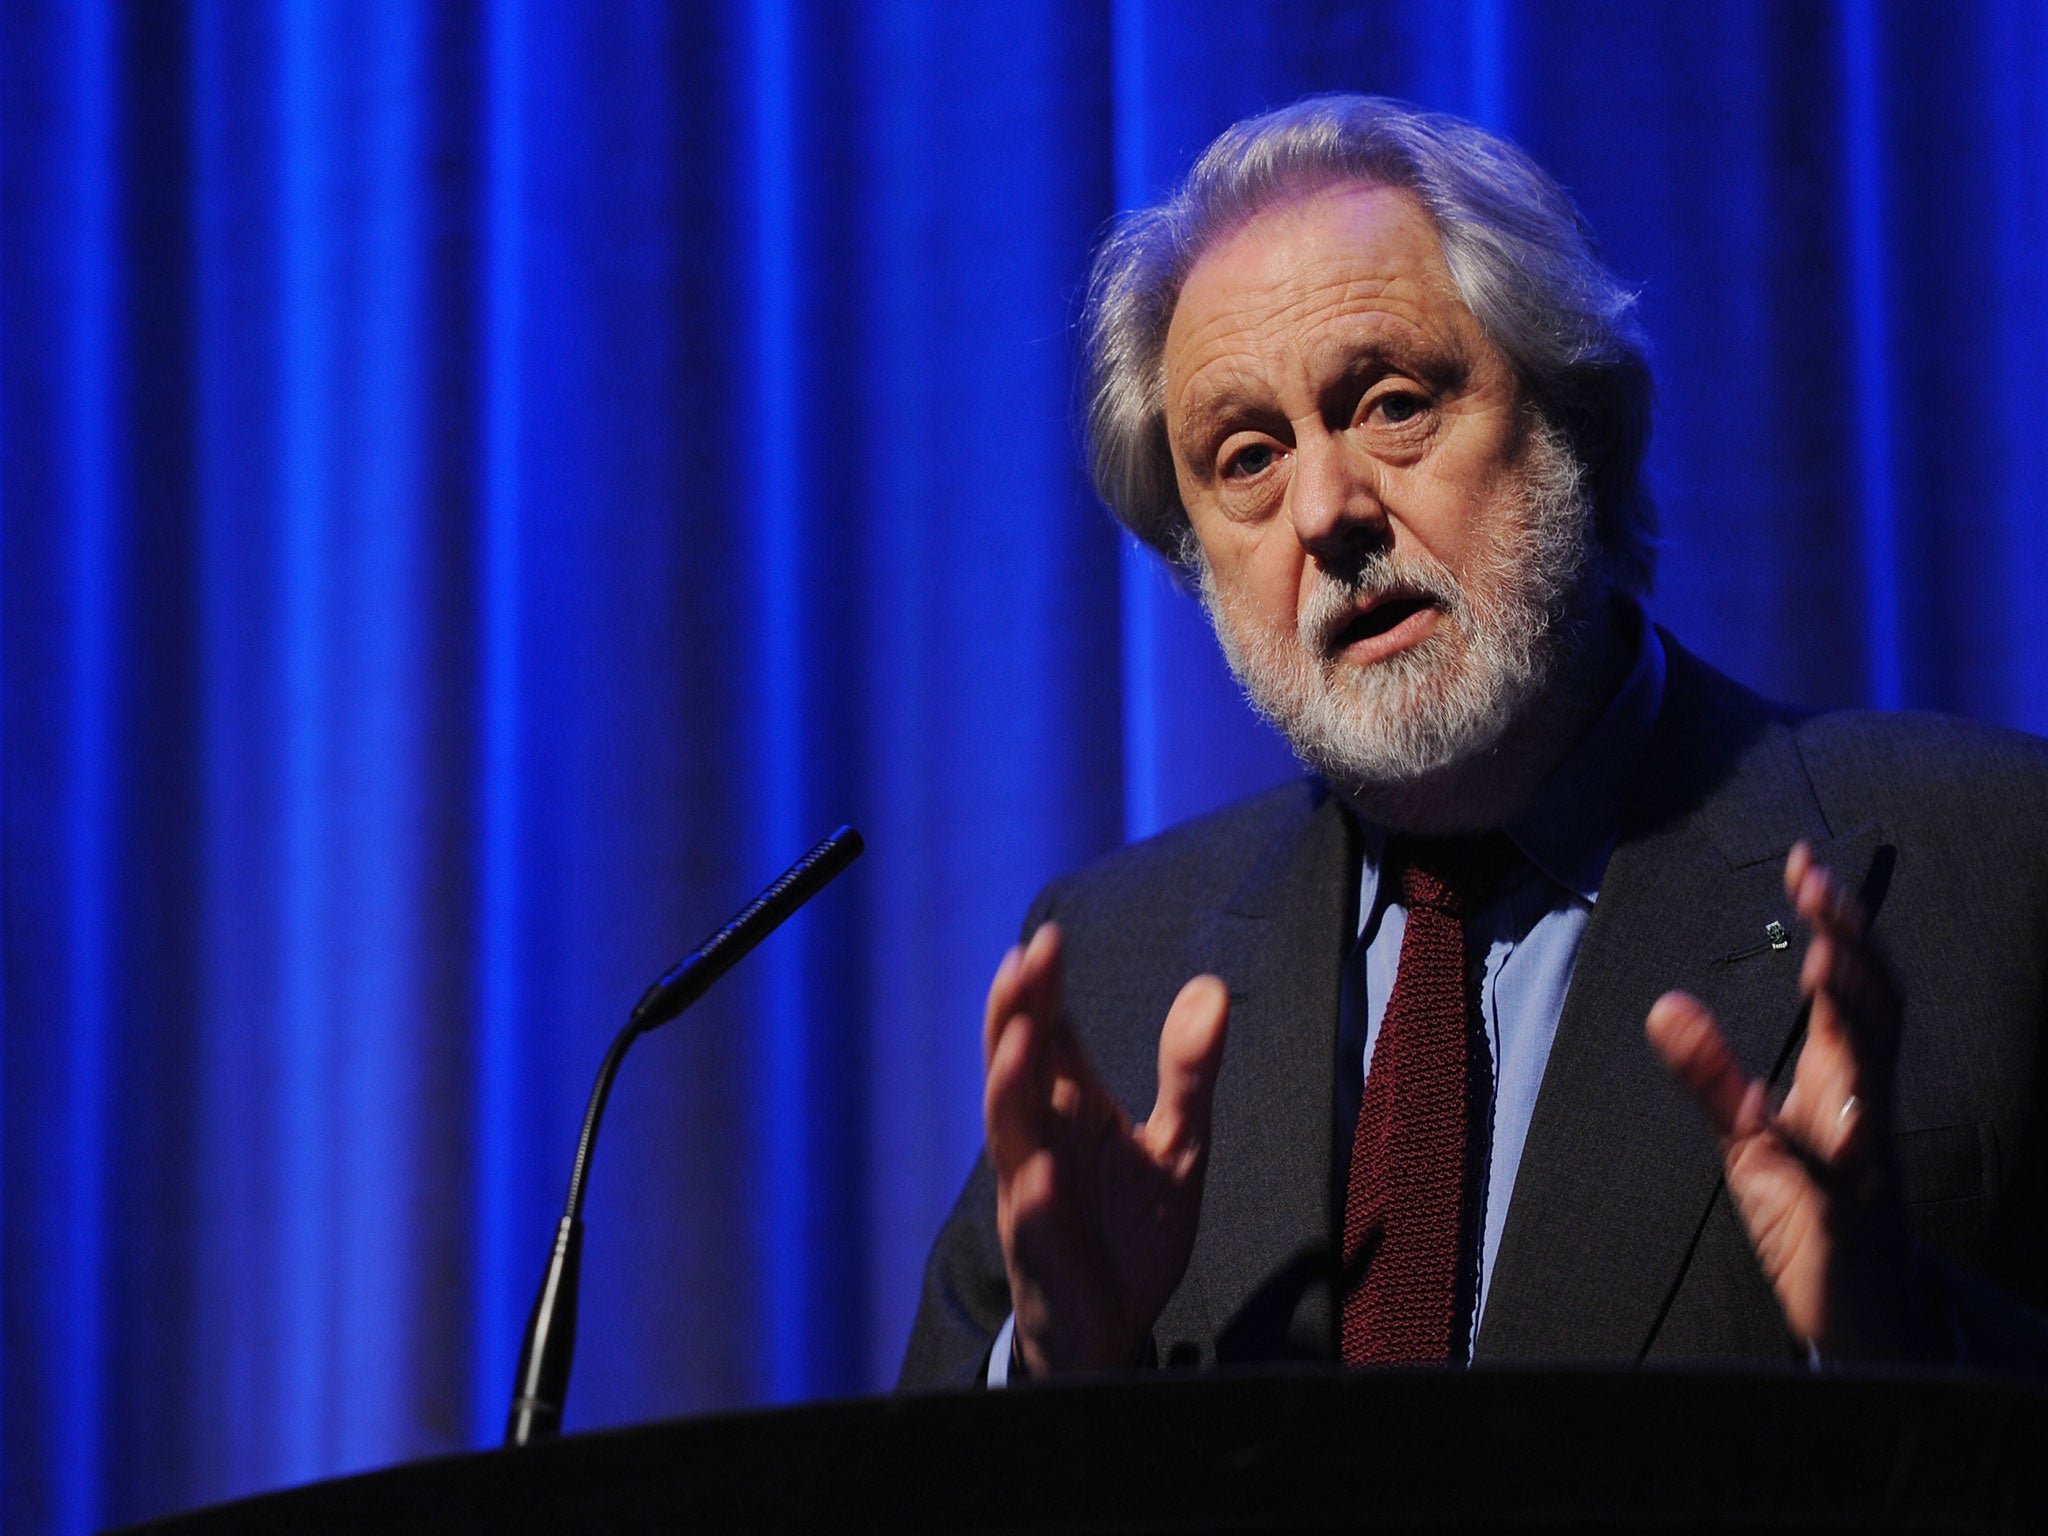 Lord Puttnam said the case for a ‘fully independent’ inquiry was overwhelming